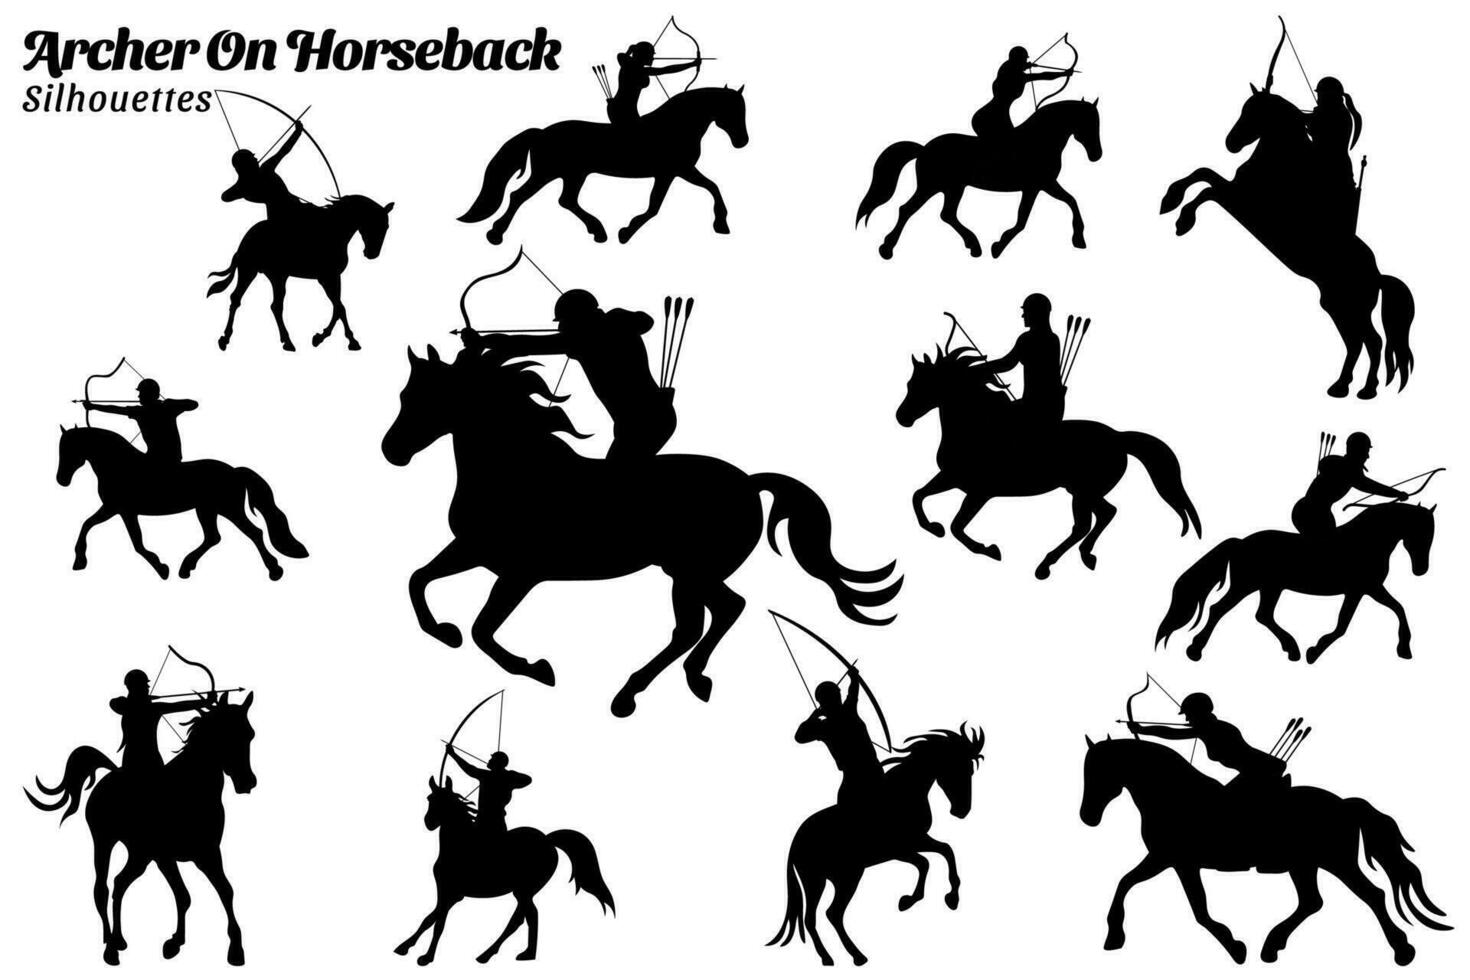 Collection of illustrations of silhouettes of archers riding horses vector